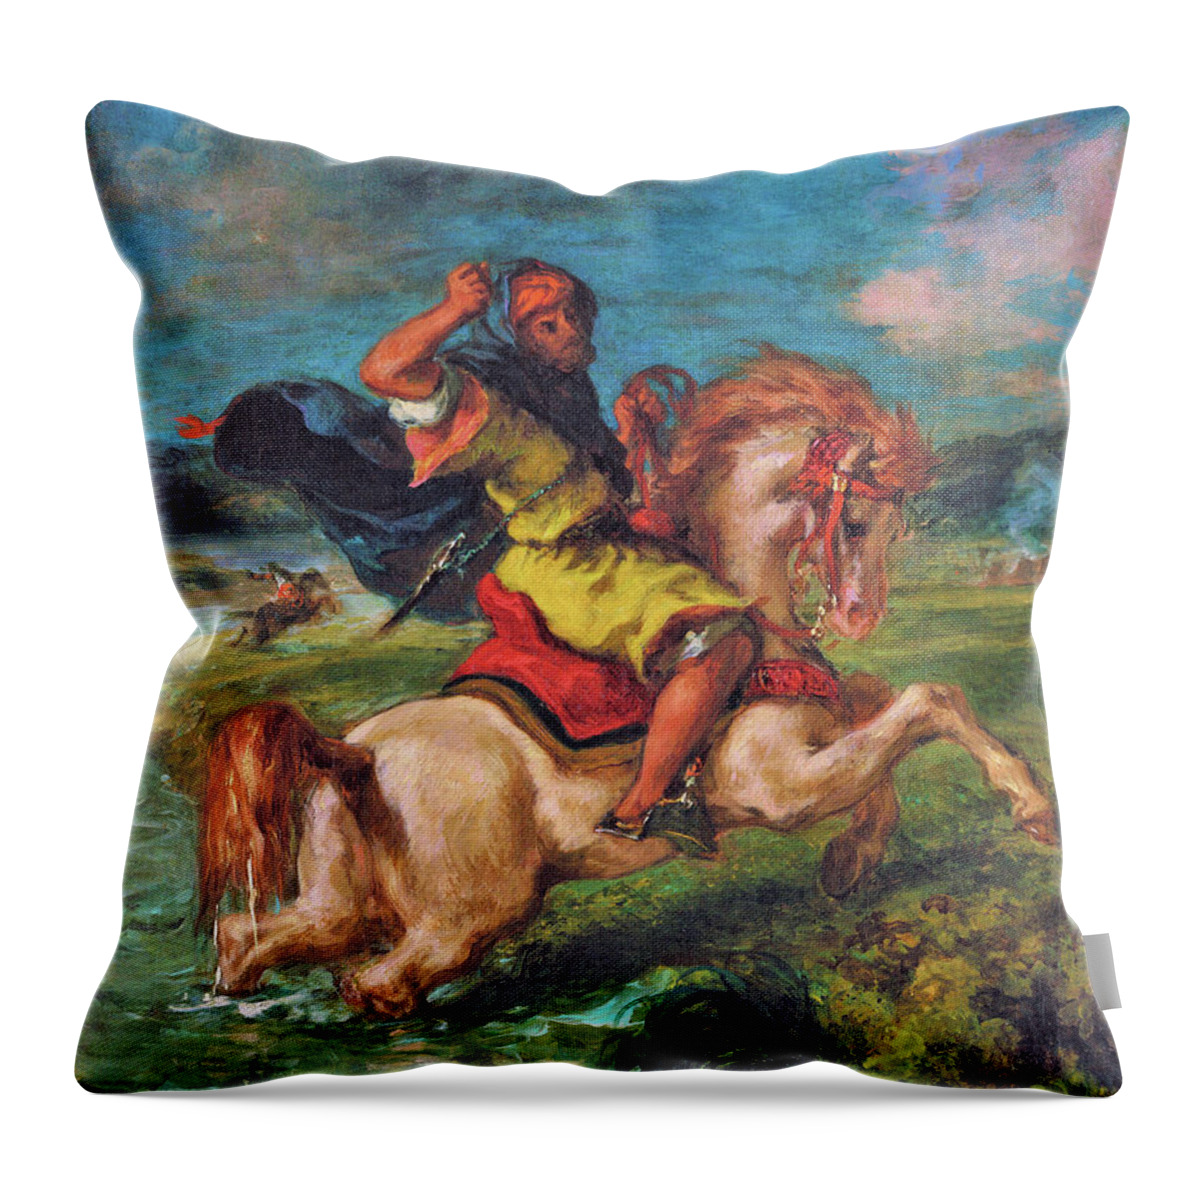 Moroccan Horseman Crossing A Ford Throw Pillow featuring the painting Moroccan Horseman Crossing a Ford - Digital Remastered Edition by Eugene Delacroix